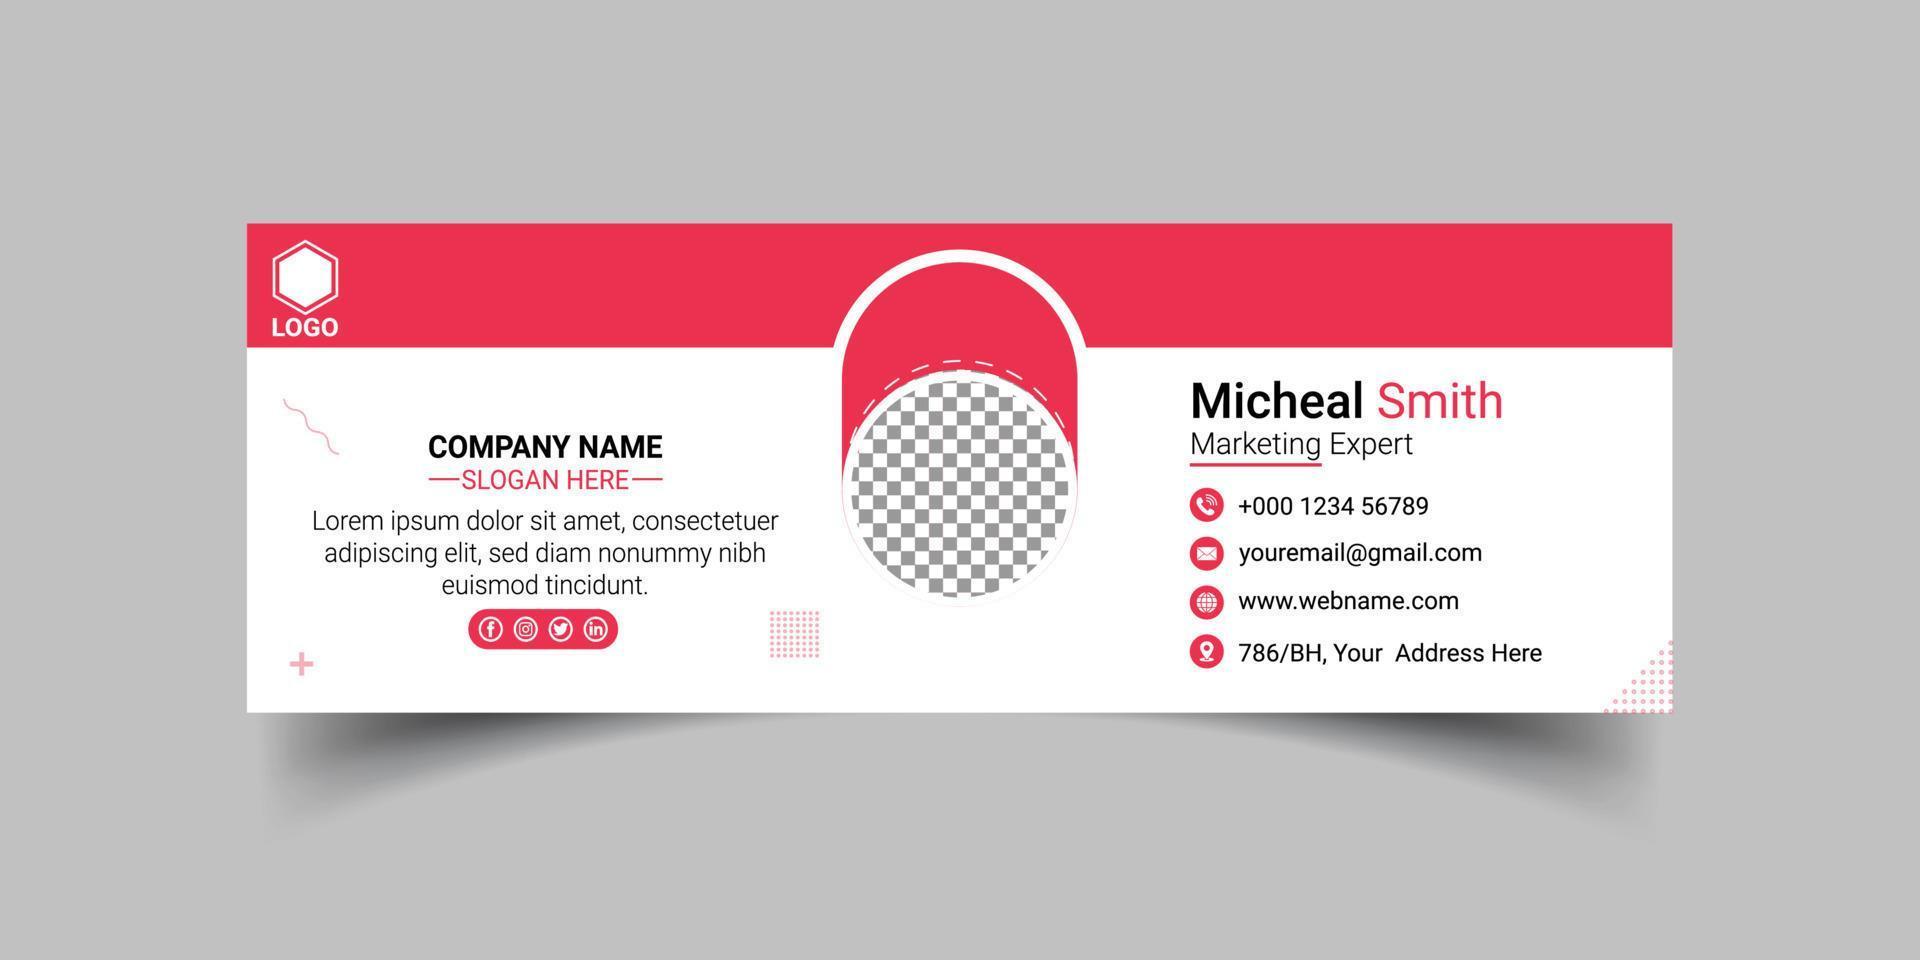 Corporate business email signature or personal facebook cover page template vector